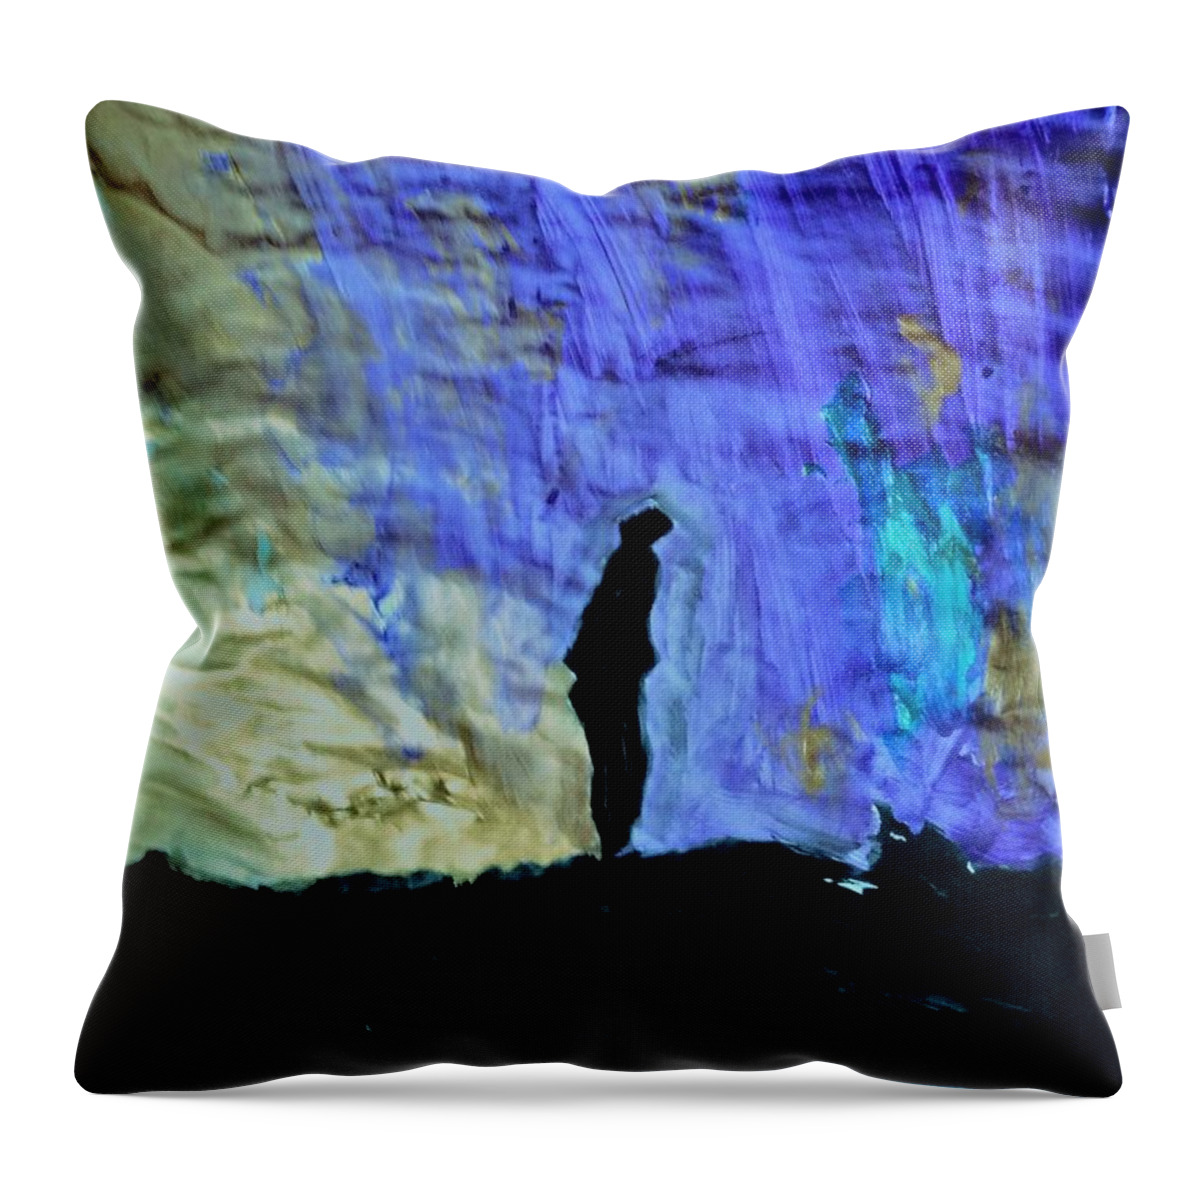 Eternity Throw Pillow featuring the painting E.t.e.r.n.i.t.y. by Love Art Wonders By God